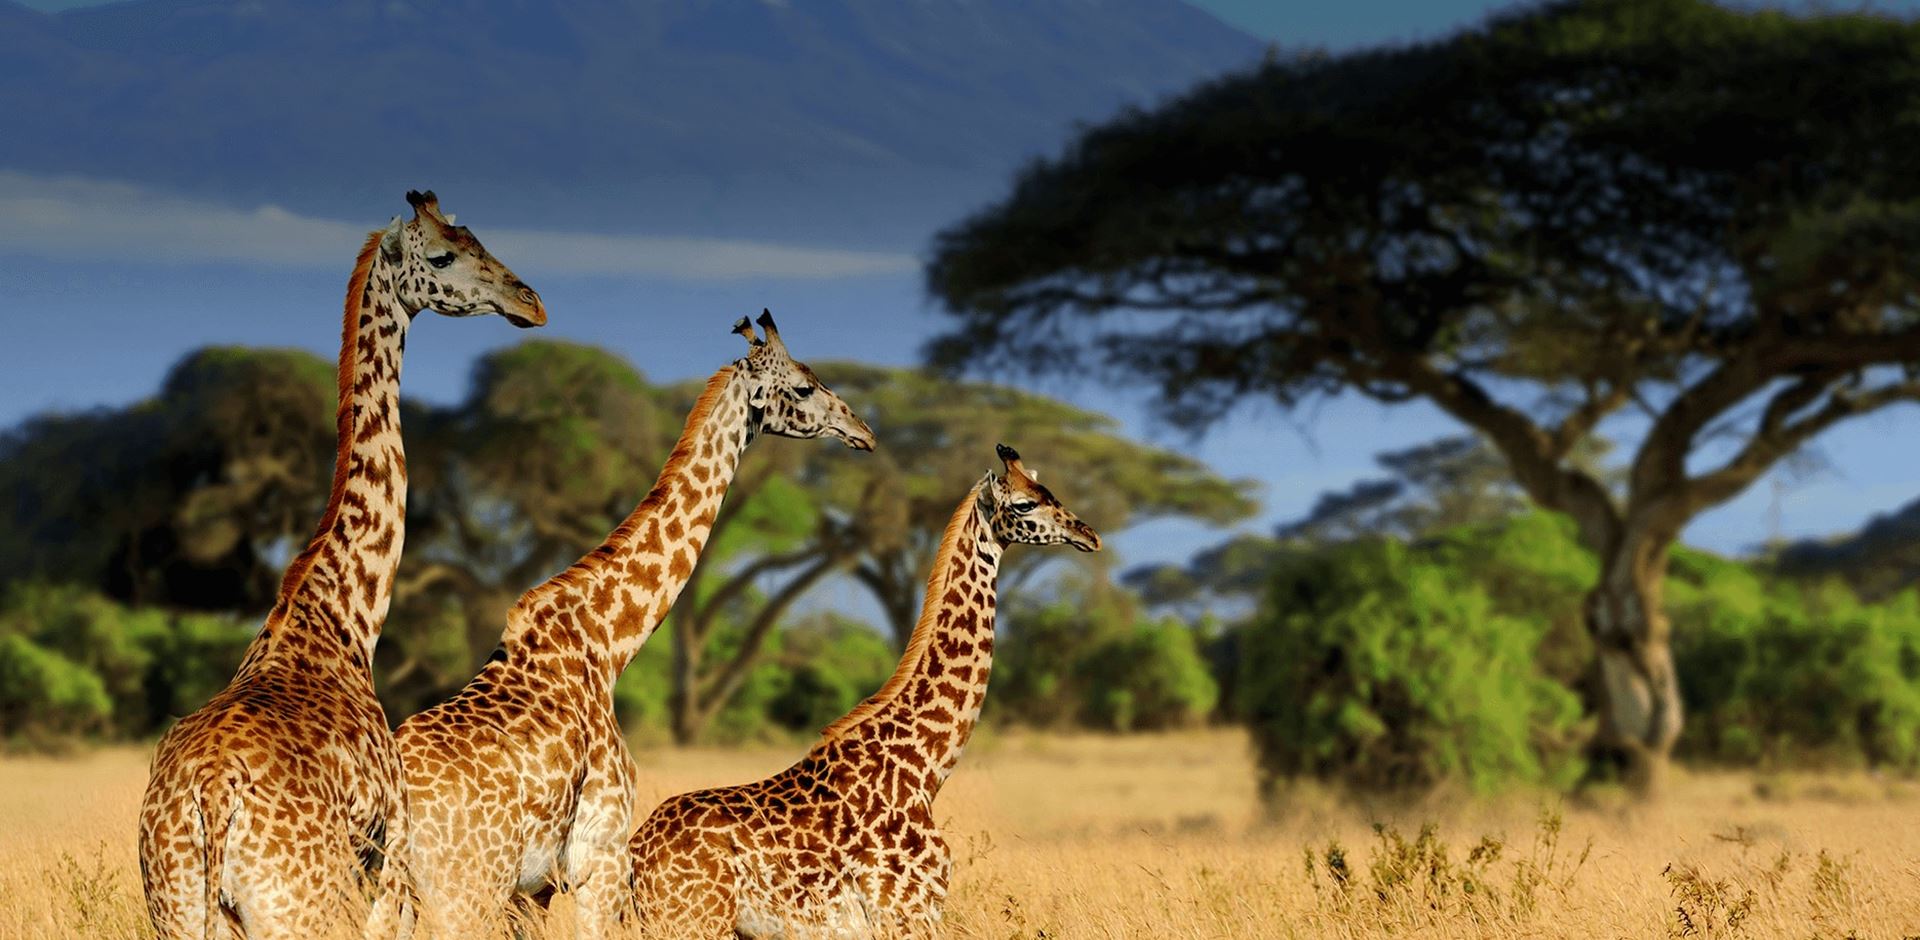 Three giraffes walking in tall yellow grass with trees and Kilimanjaro mount behind them in National park of Kenya, Africa. 